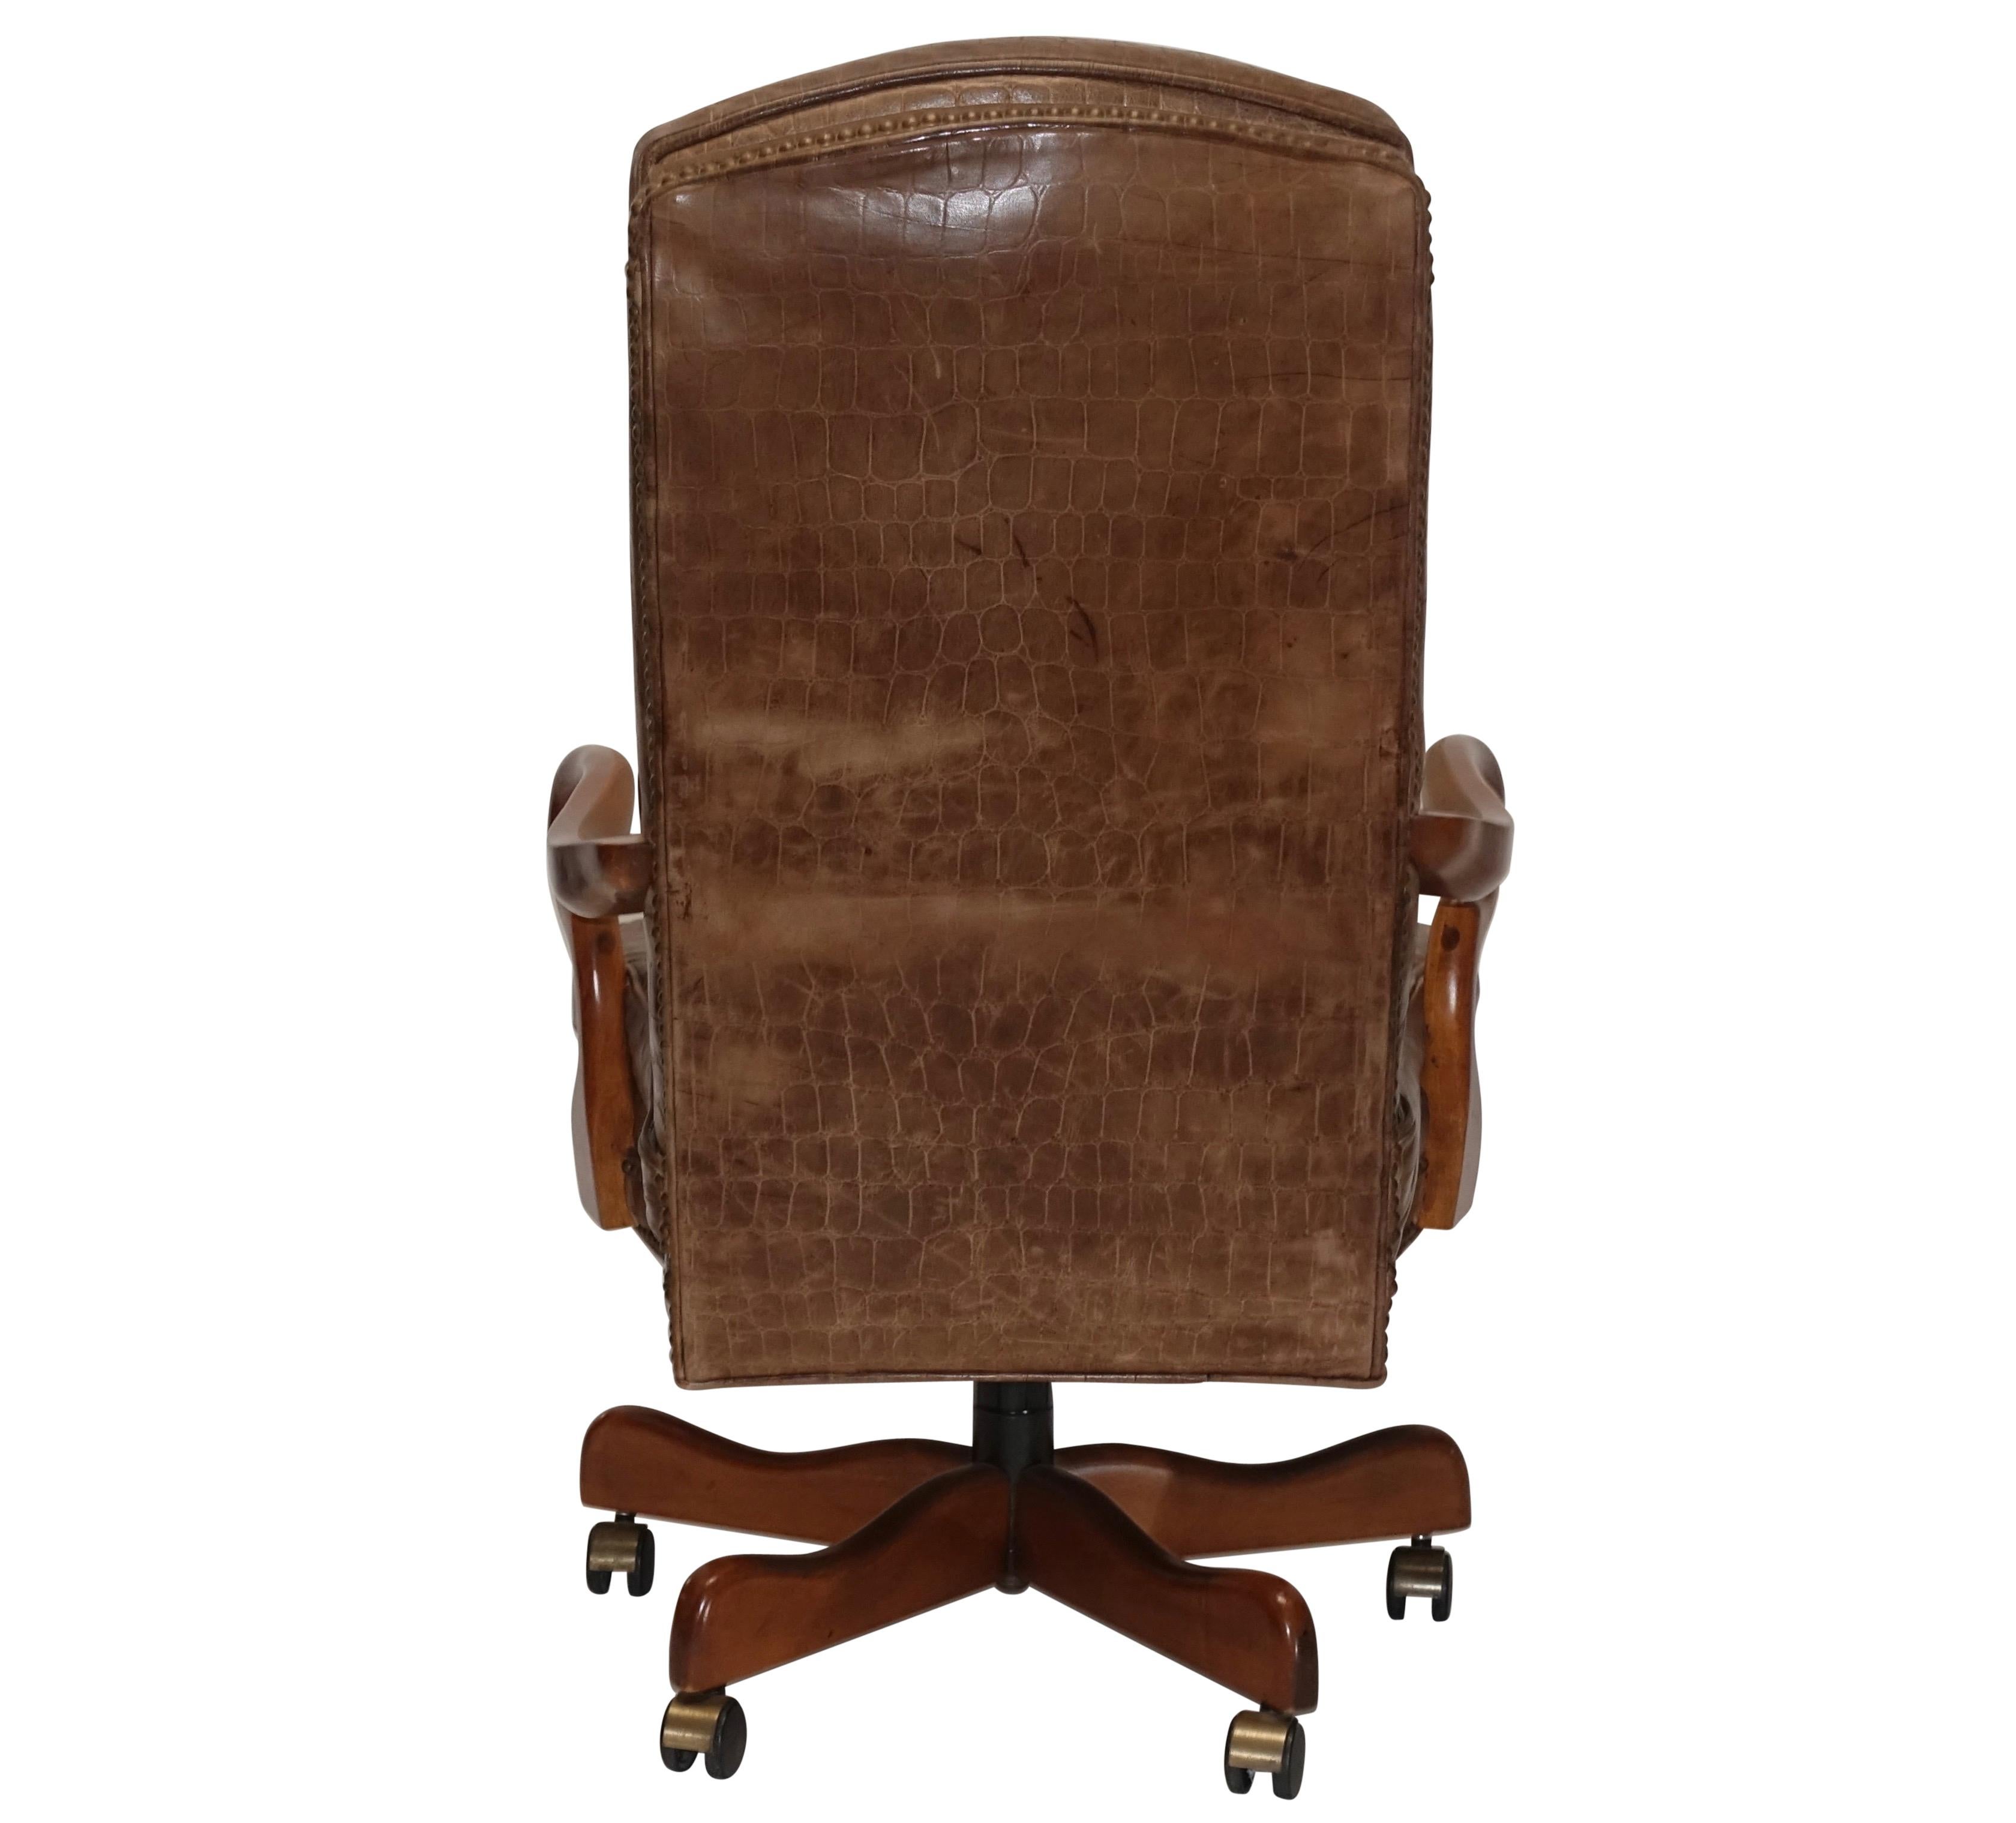 20th Century Executive Desk Chair with Alligator Embossed Leather